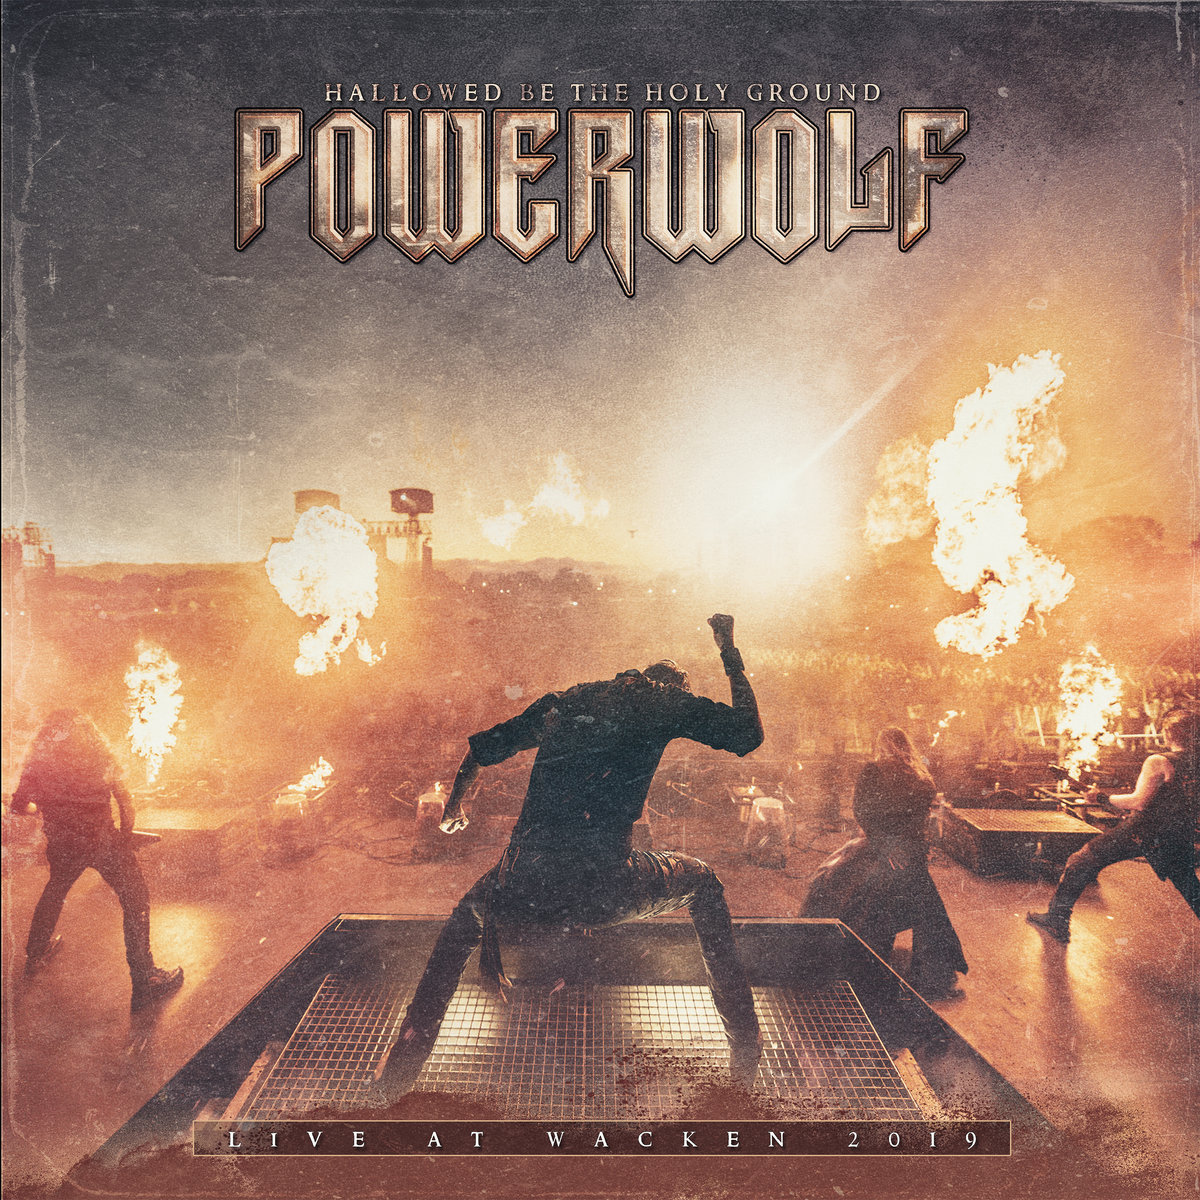 Powerwolf - Hallowed Be the Holy Ground: Live at Wacken 2019: lyrics and  songs